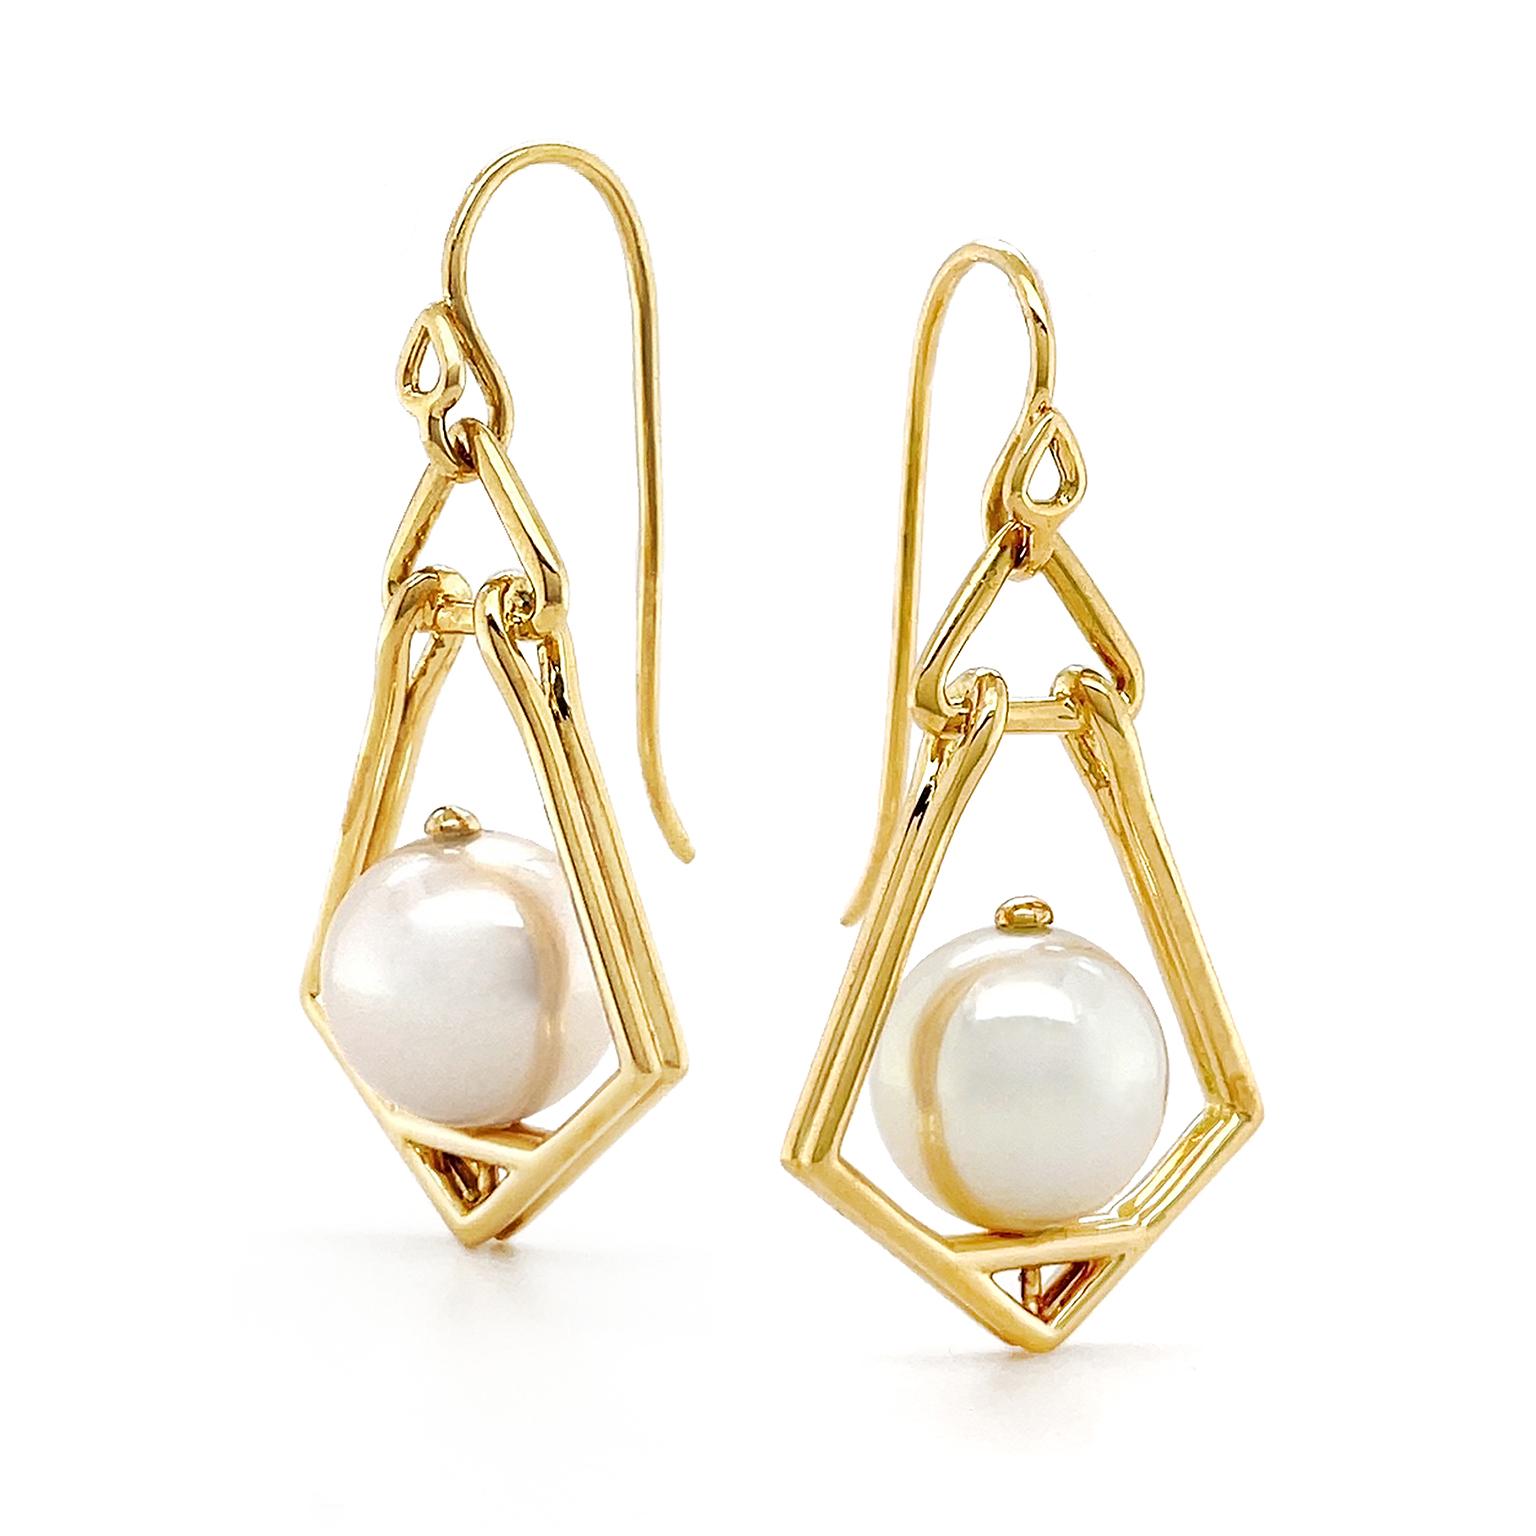 Valentin Magro Geometric Lantern Large Pearl Earrings For Sale at ...